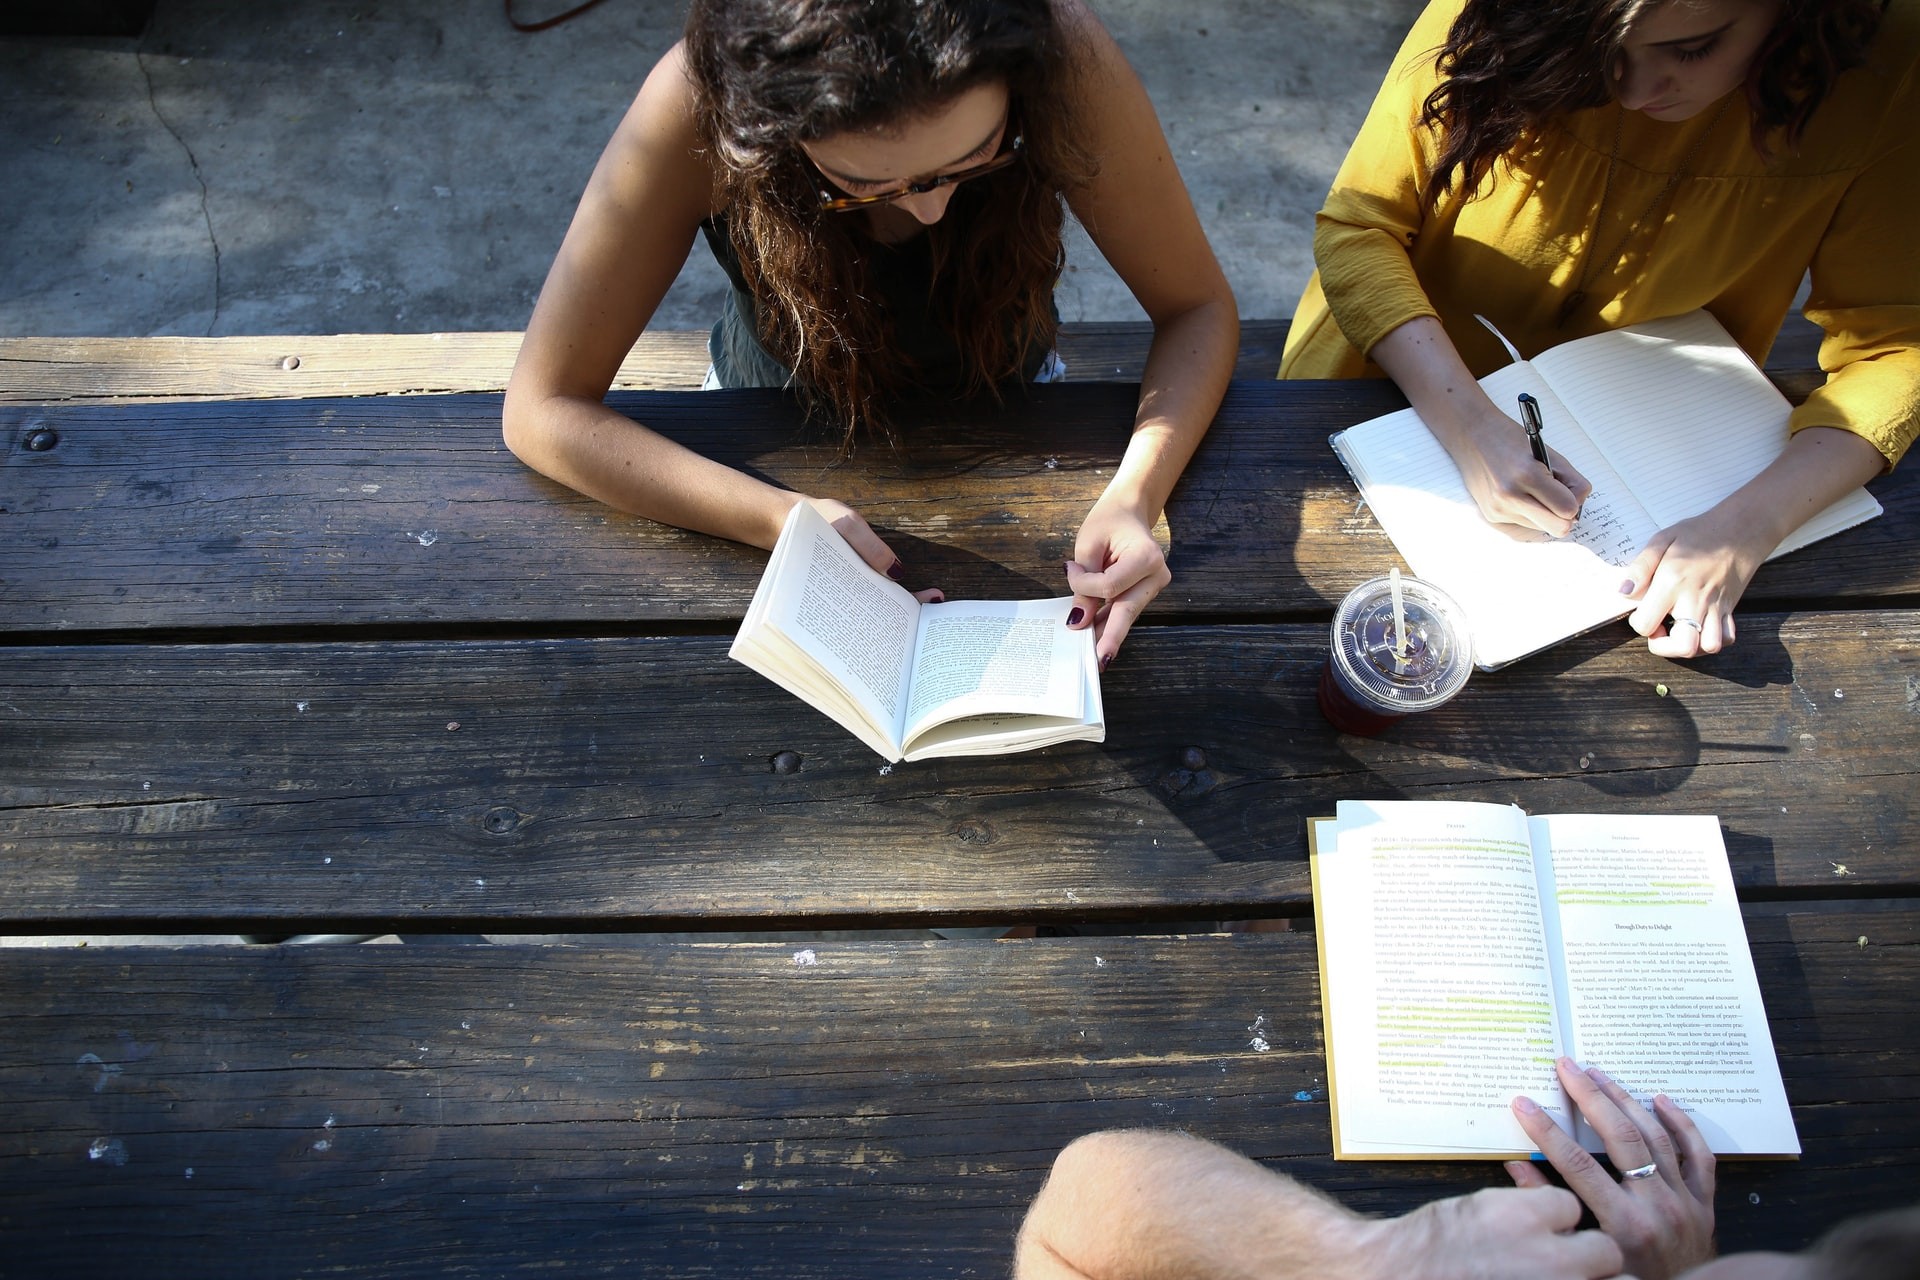 A group of college students uses social study strategies to prepare for a test.